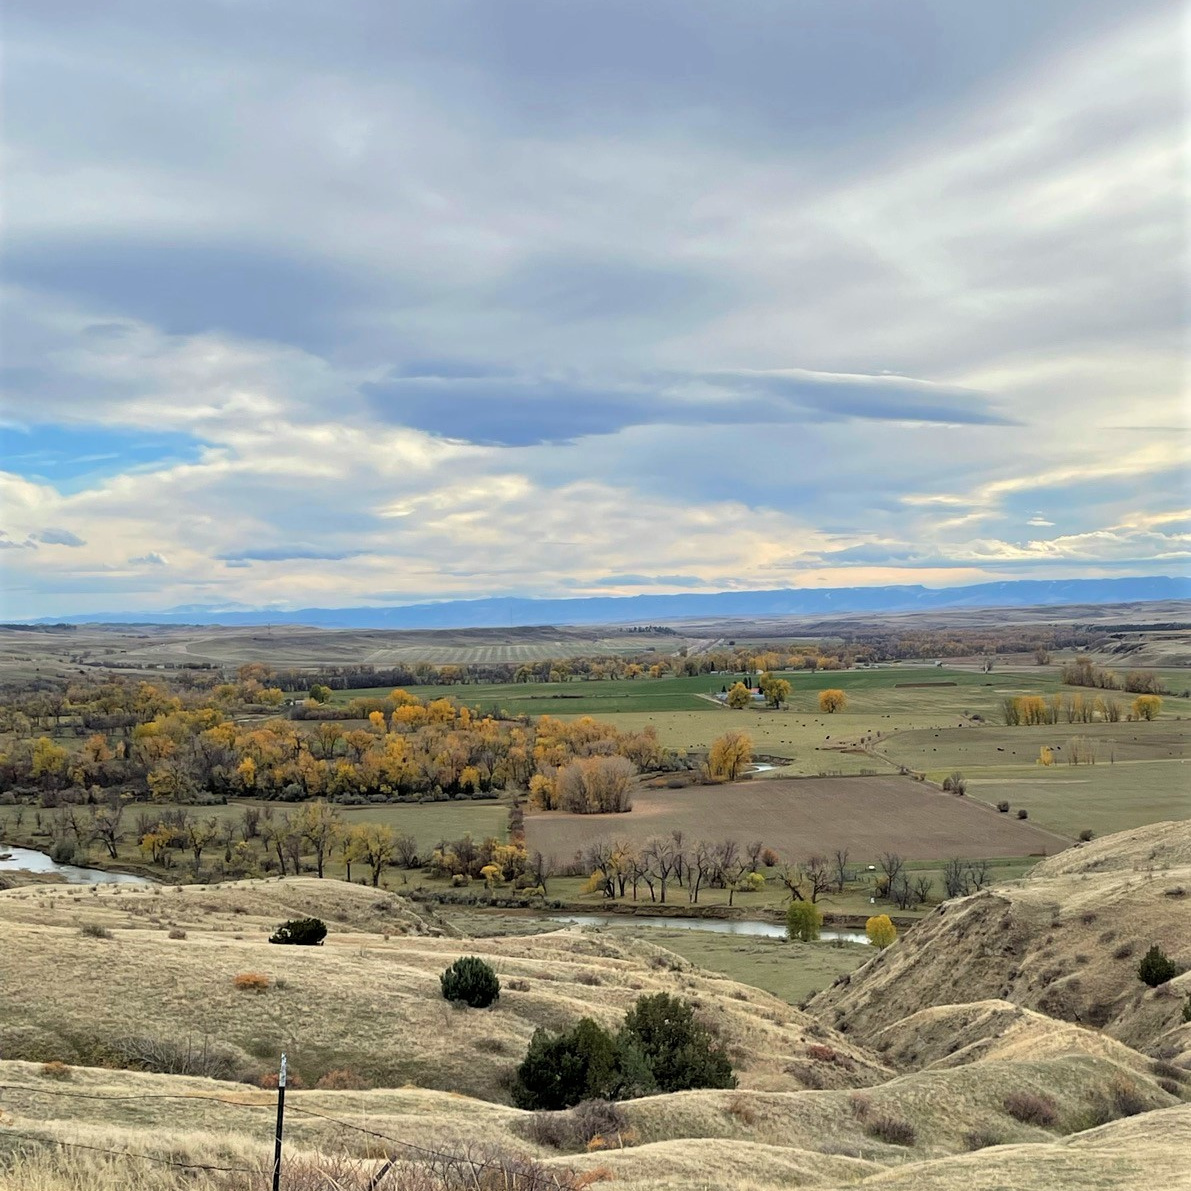 Touring Little Bighorn + More